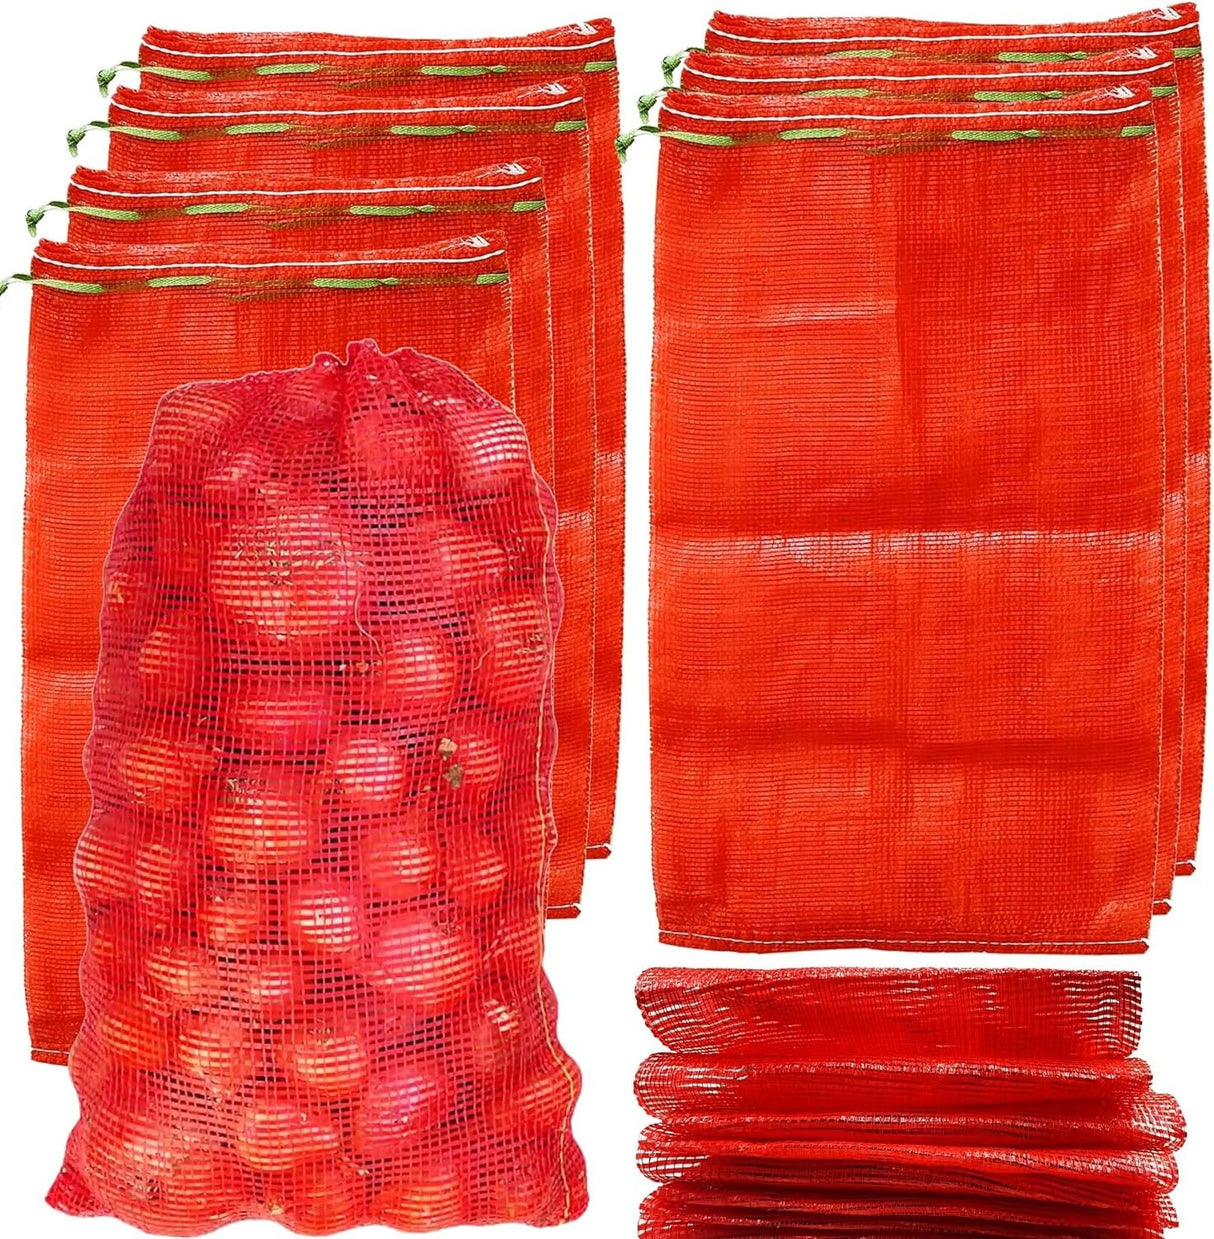 SINGHAL Leno Mesh Storage Produce Bags Reusable for Vegetable Storage Bags Onion Storage Washable Net Bags (22x40 Inch - Raani, 25)